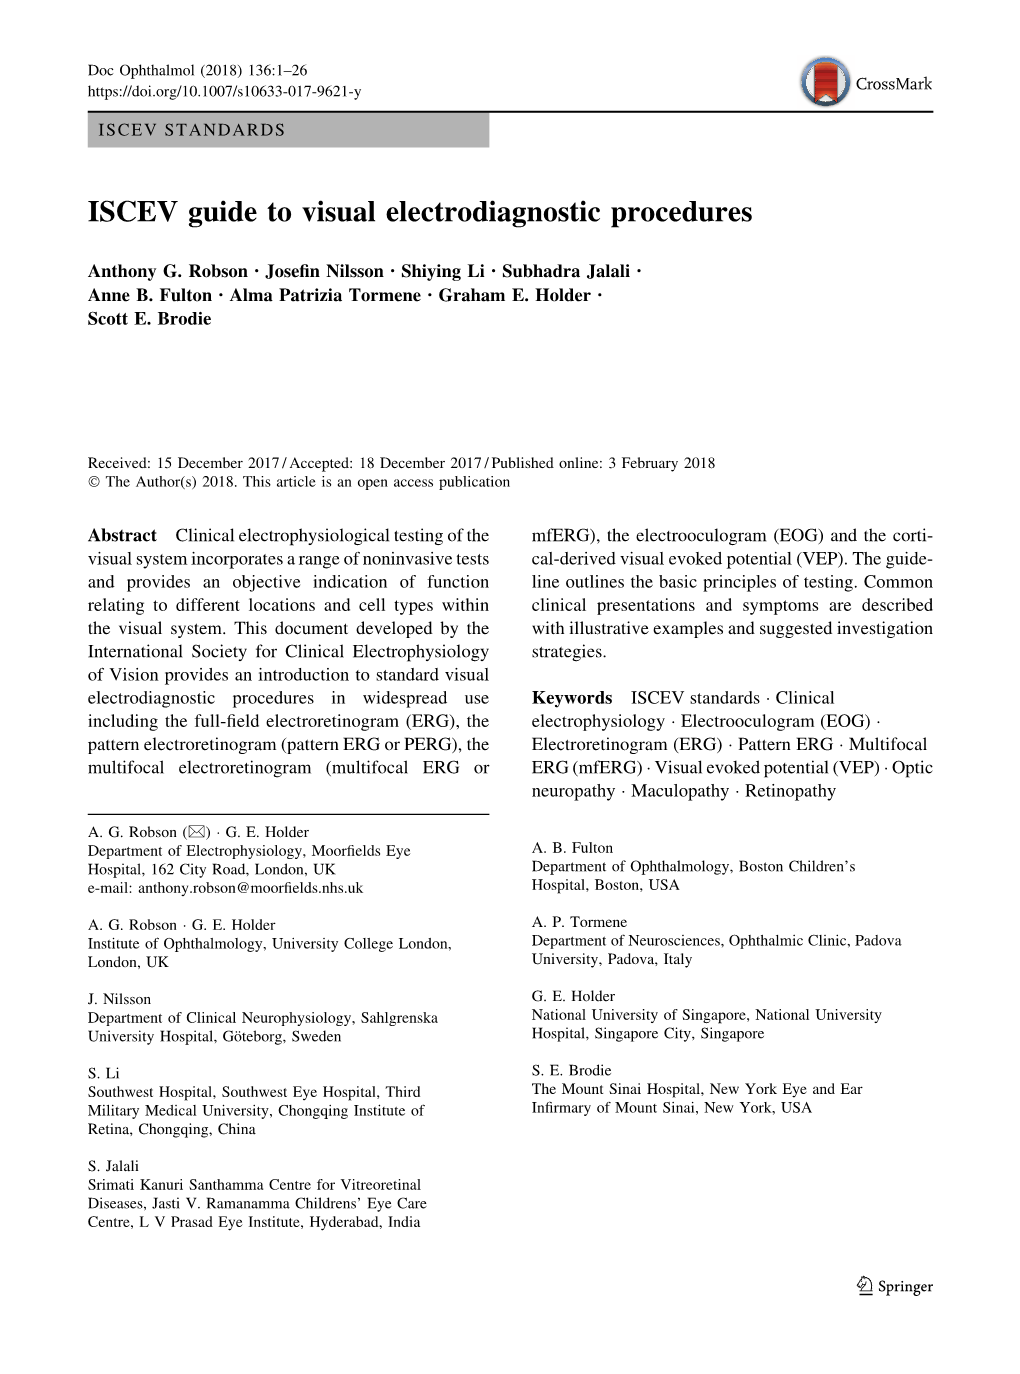 ISCEV Guide to Visual Electrodiagnostic Procedures